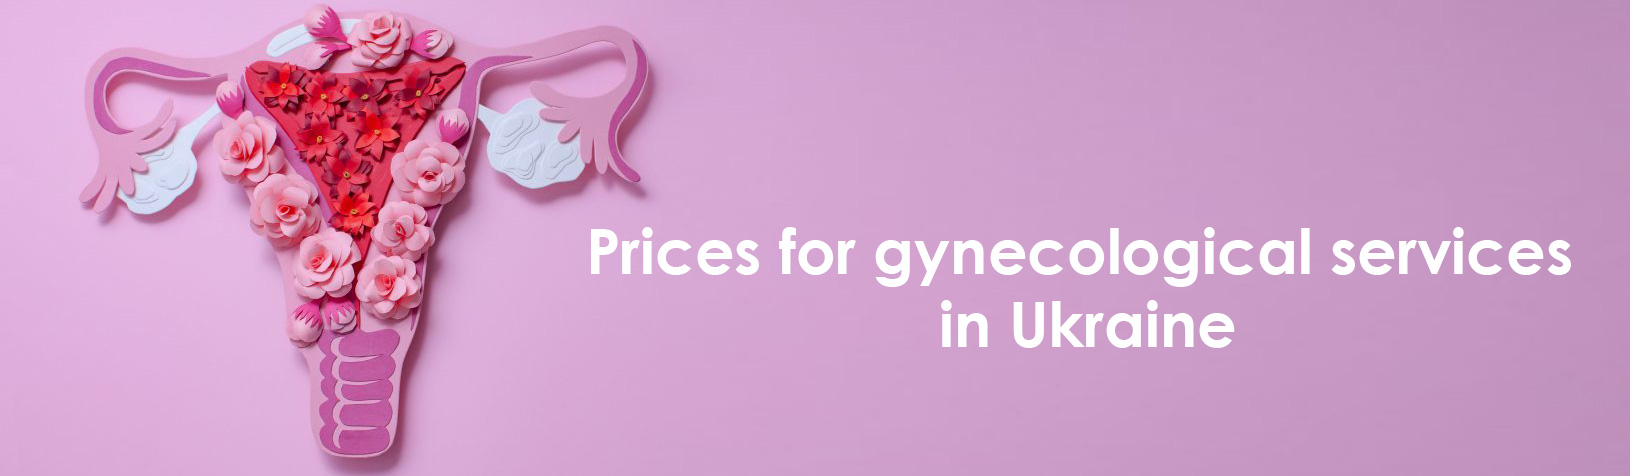 Prices for gynecological services in Ukraine